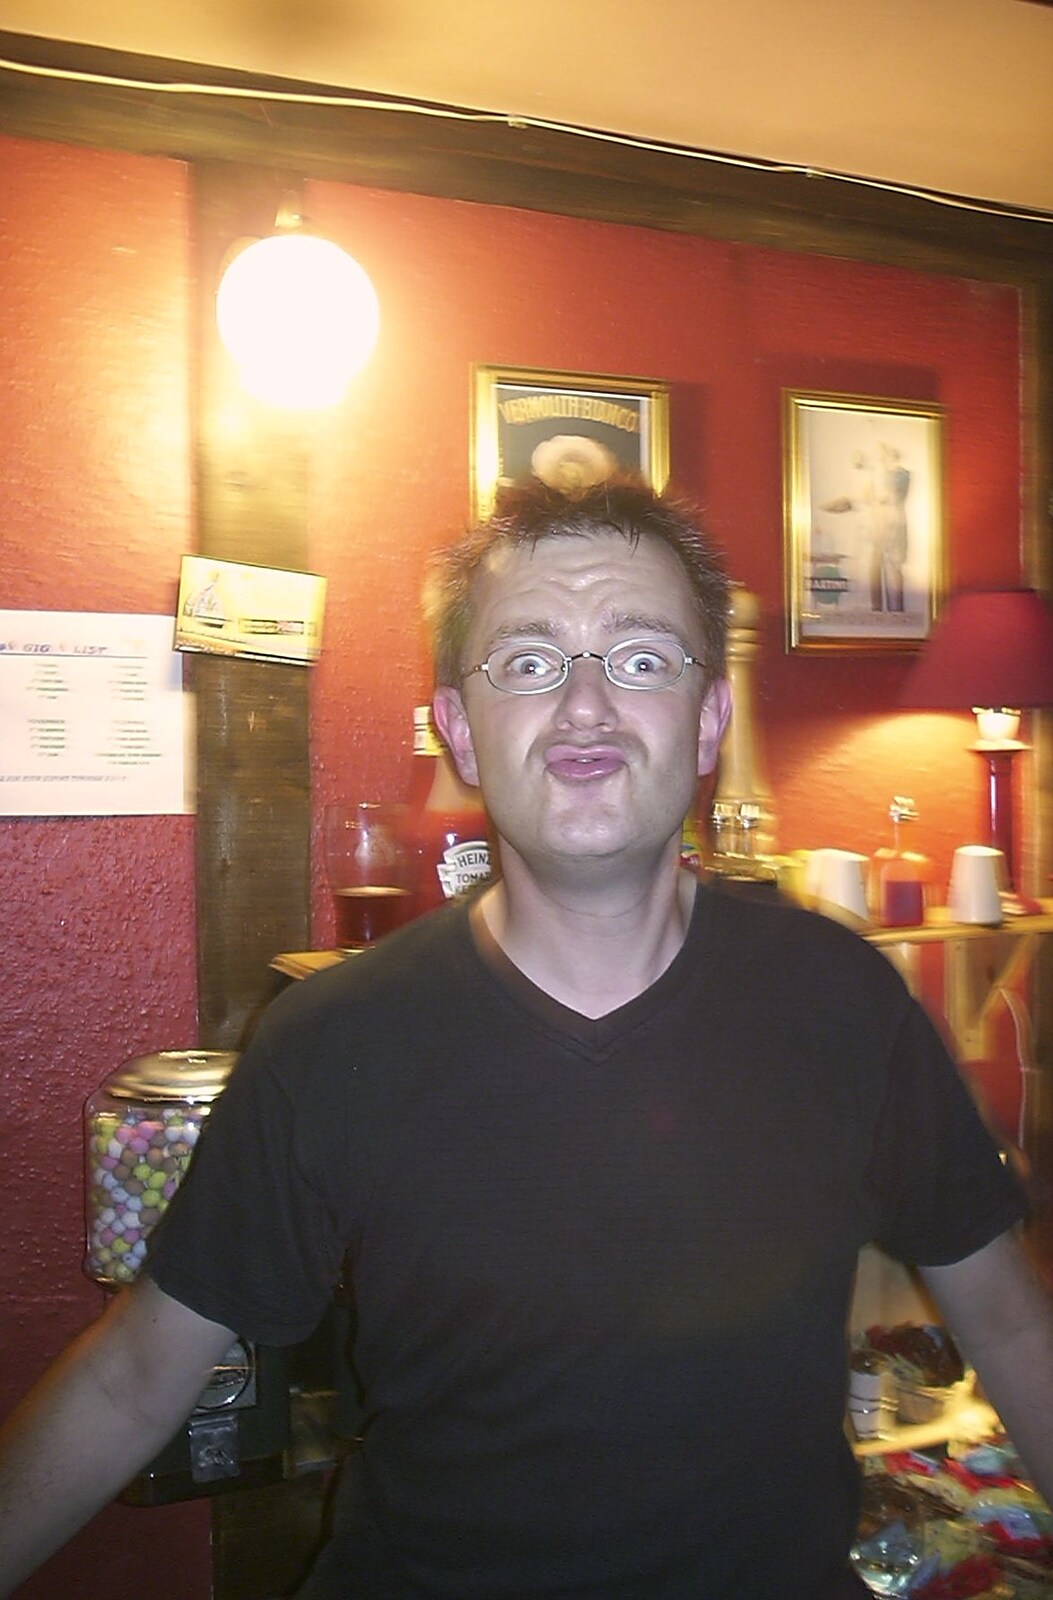 Mark Joseph at Revs, and the BSCC at Hoxne and Wortham - 30th September 2004: Nosher does that face